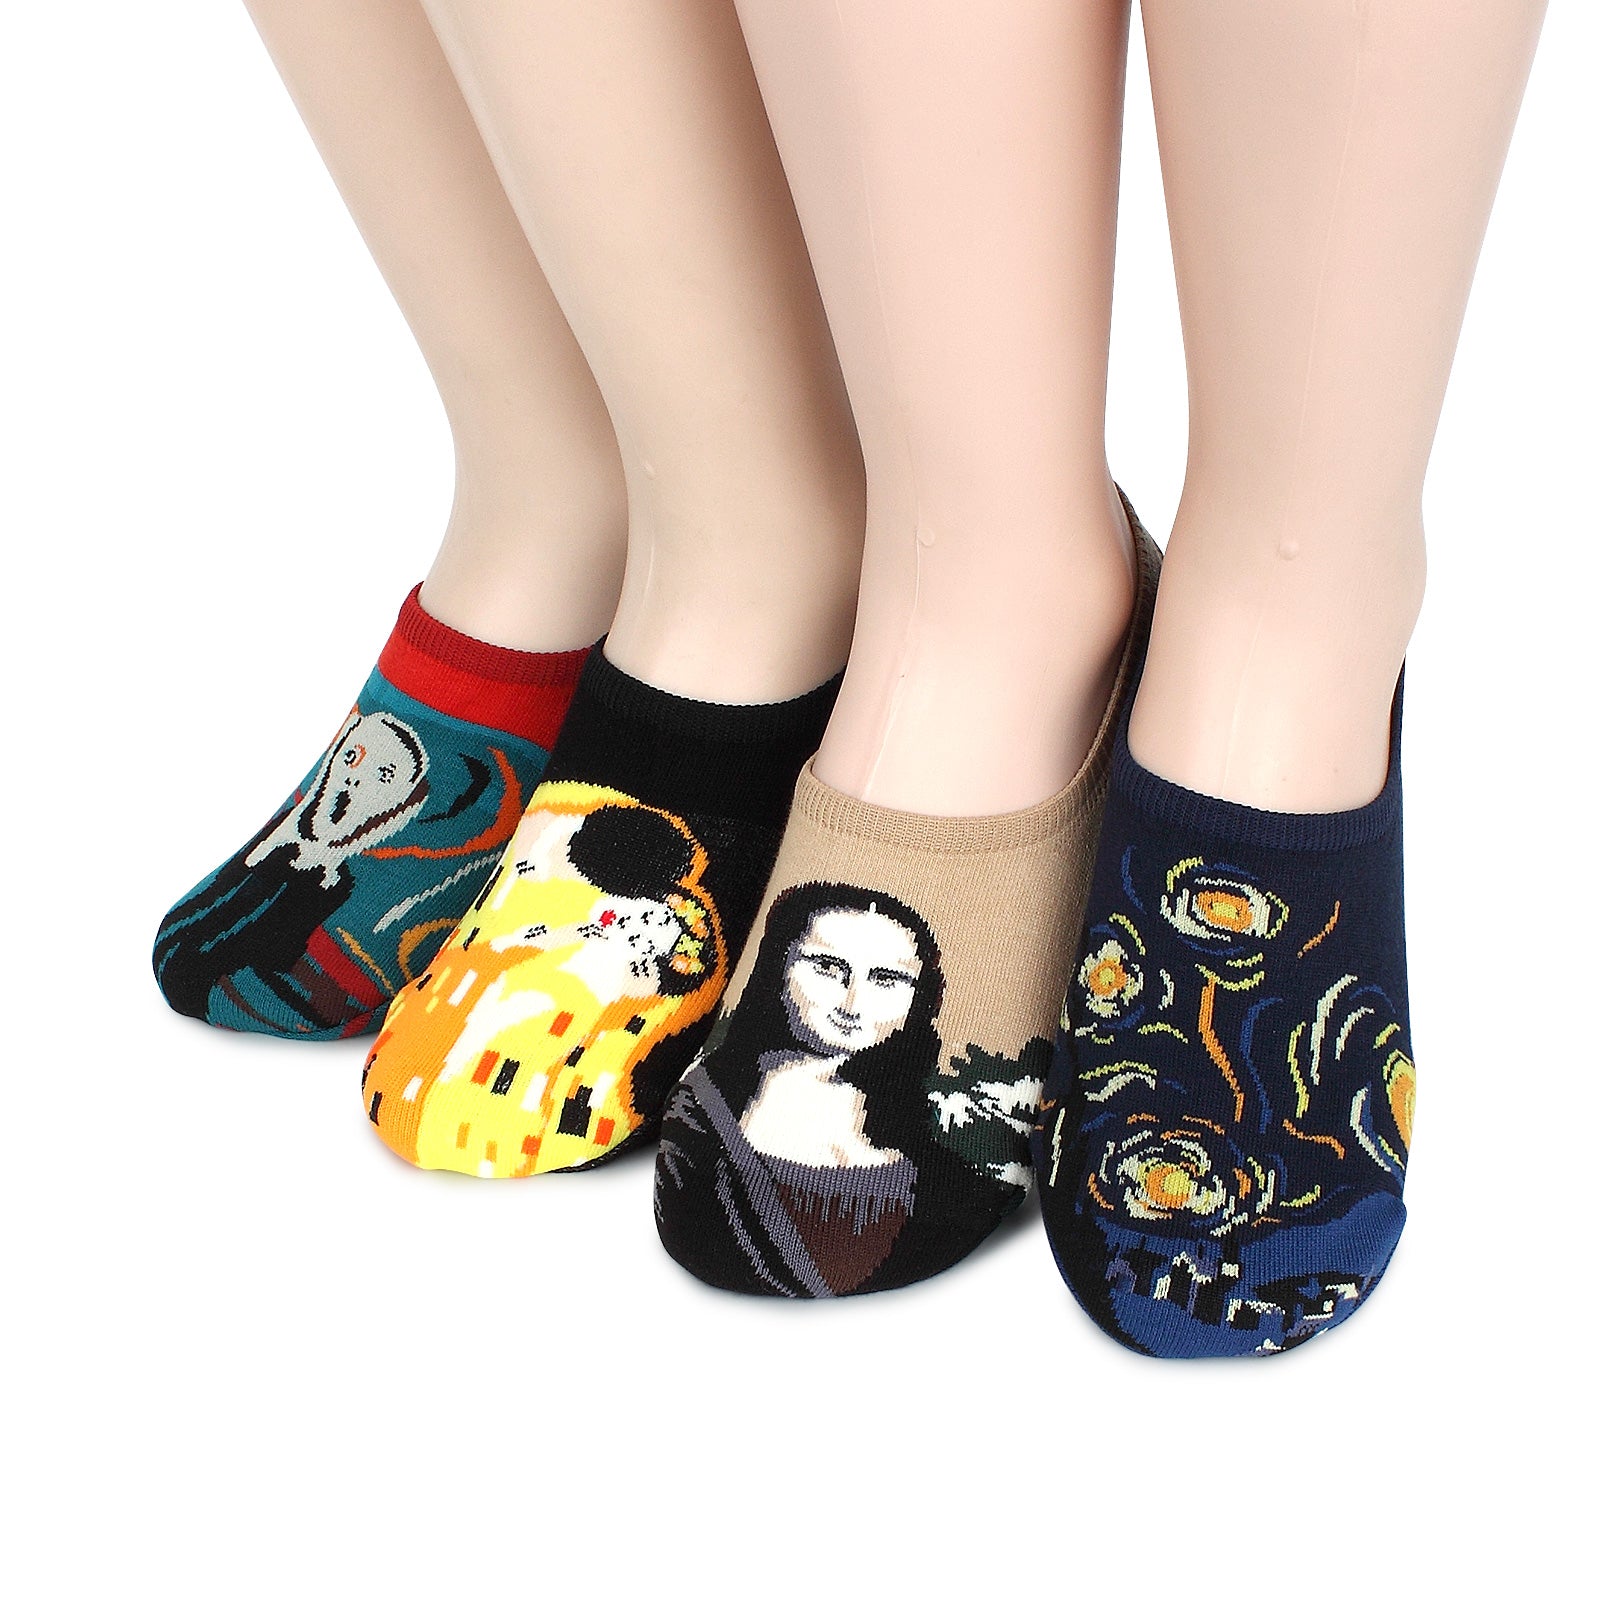 (4 Pairs) Famous Painting Masterpiece Printing No show Socks with DA14 - intypesocks